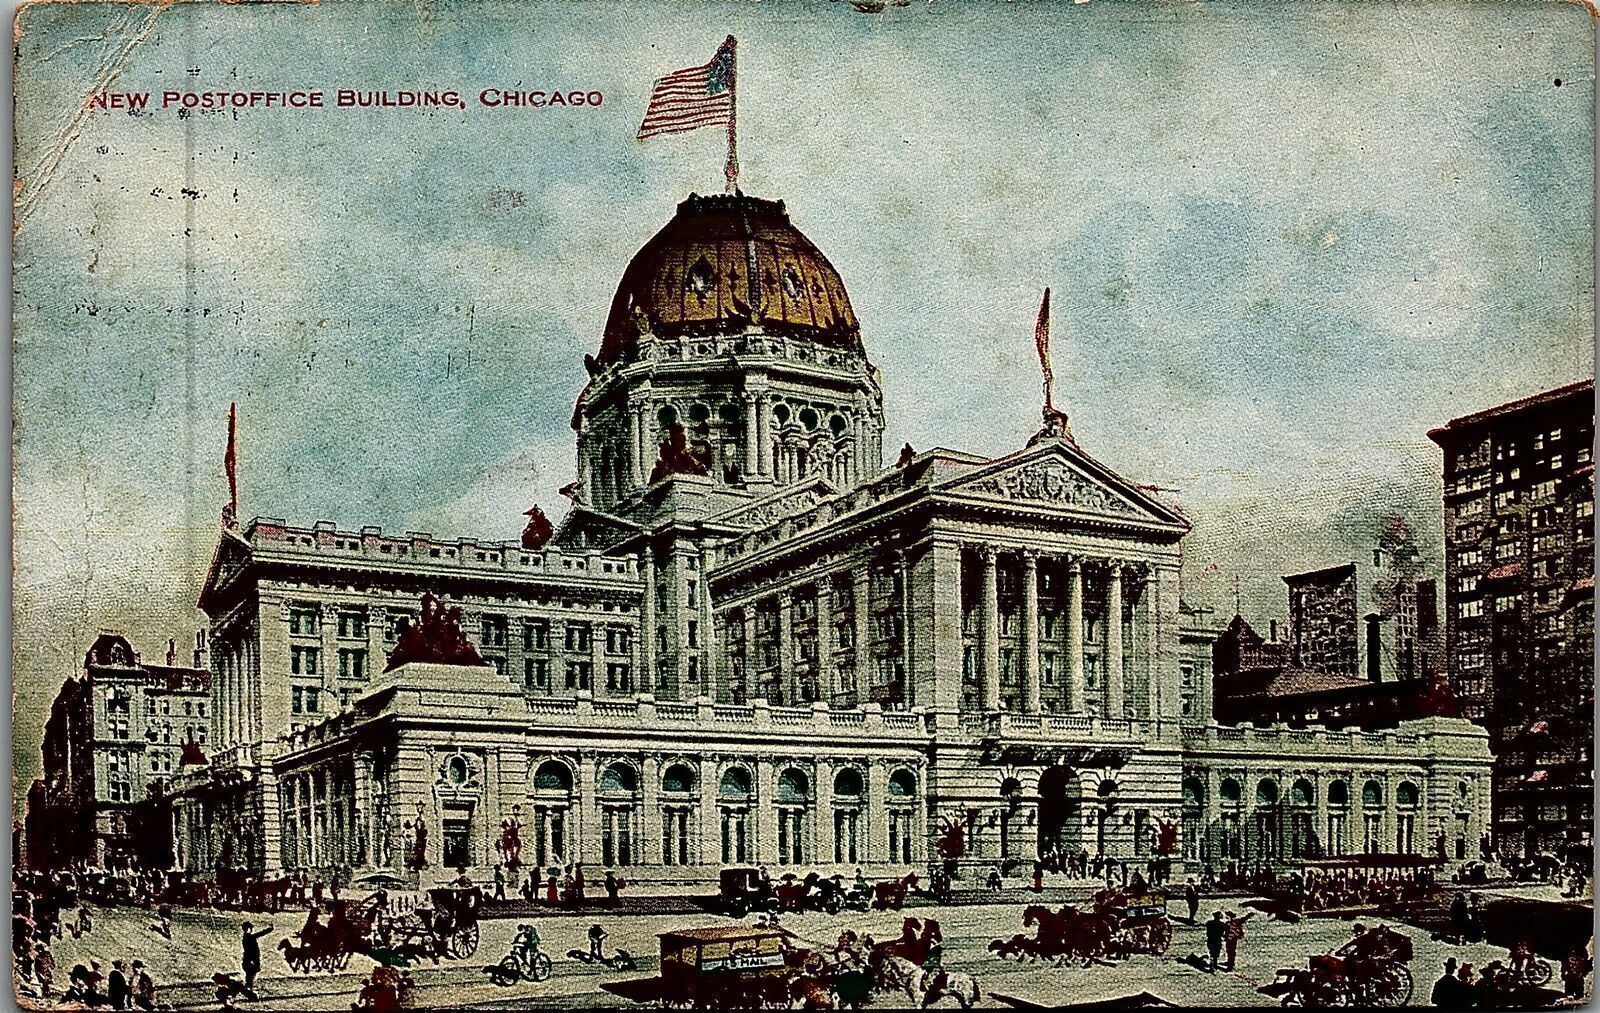 1909 CHICAGO NEW POSTOFFICE BUILDING HORSE DRAWN CARRIAGES POSTCARD 25-139